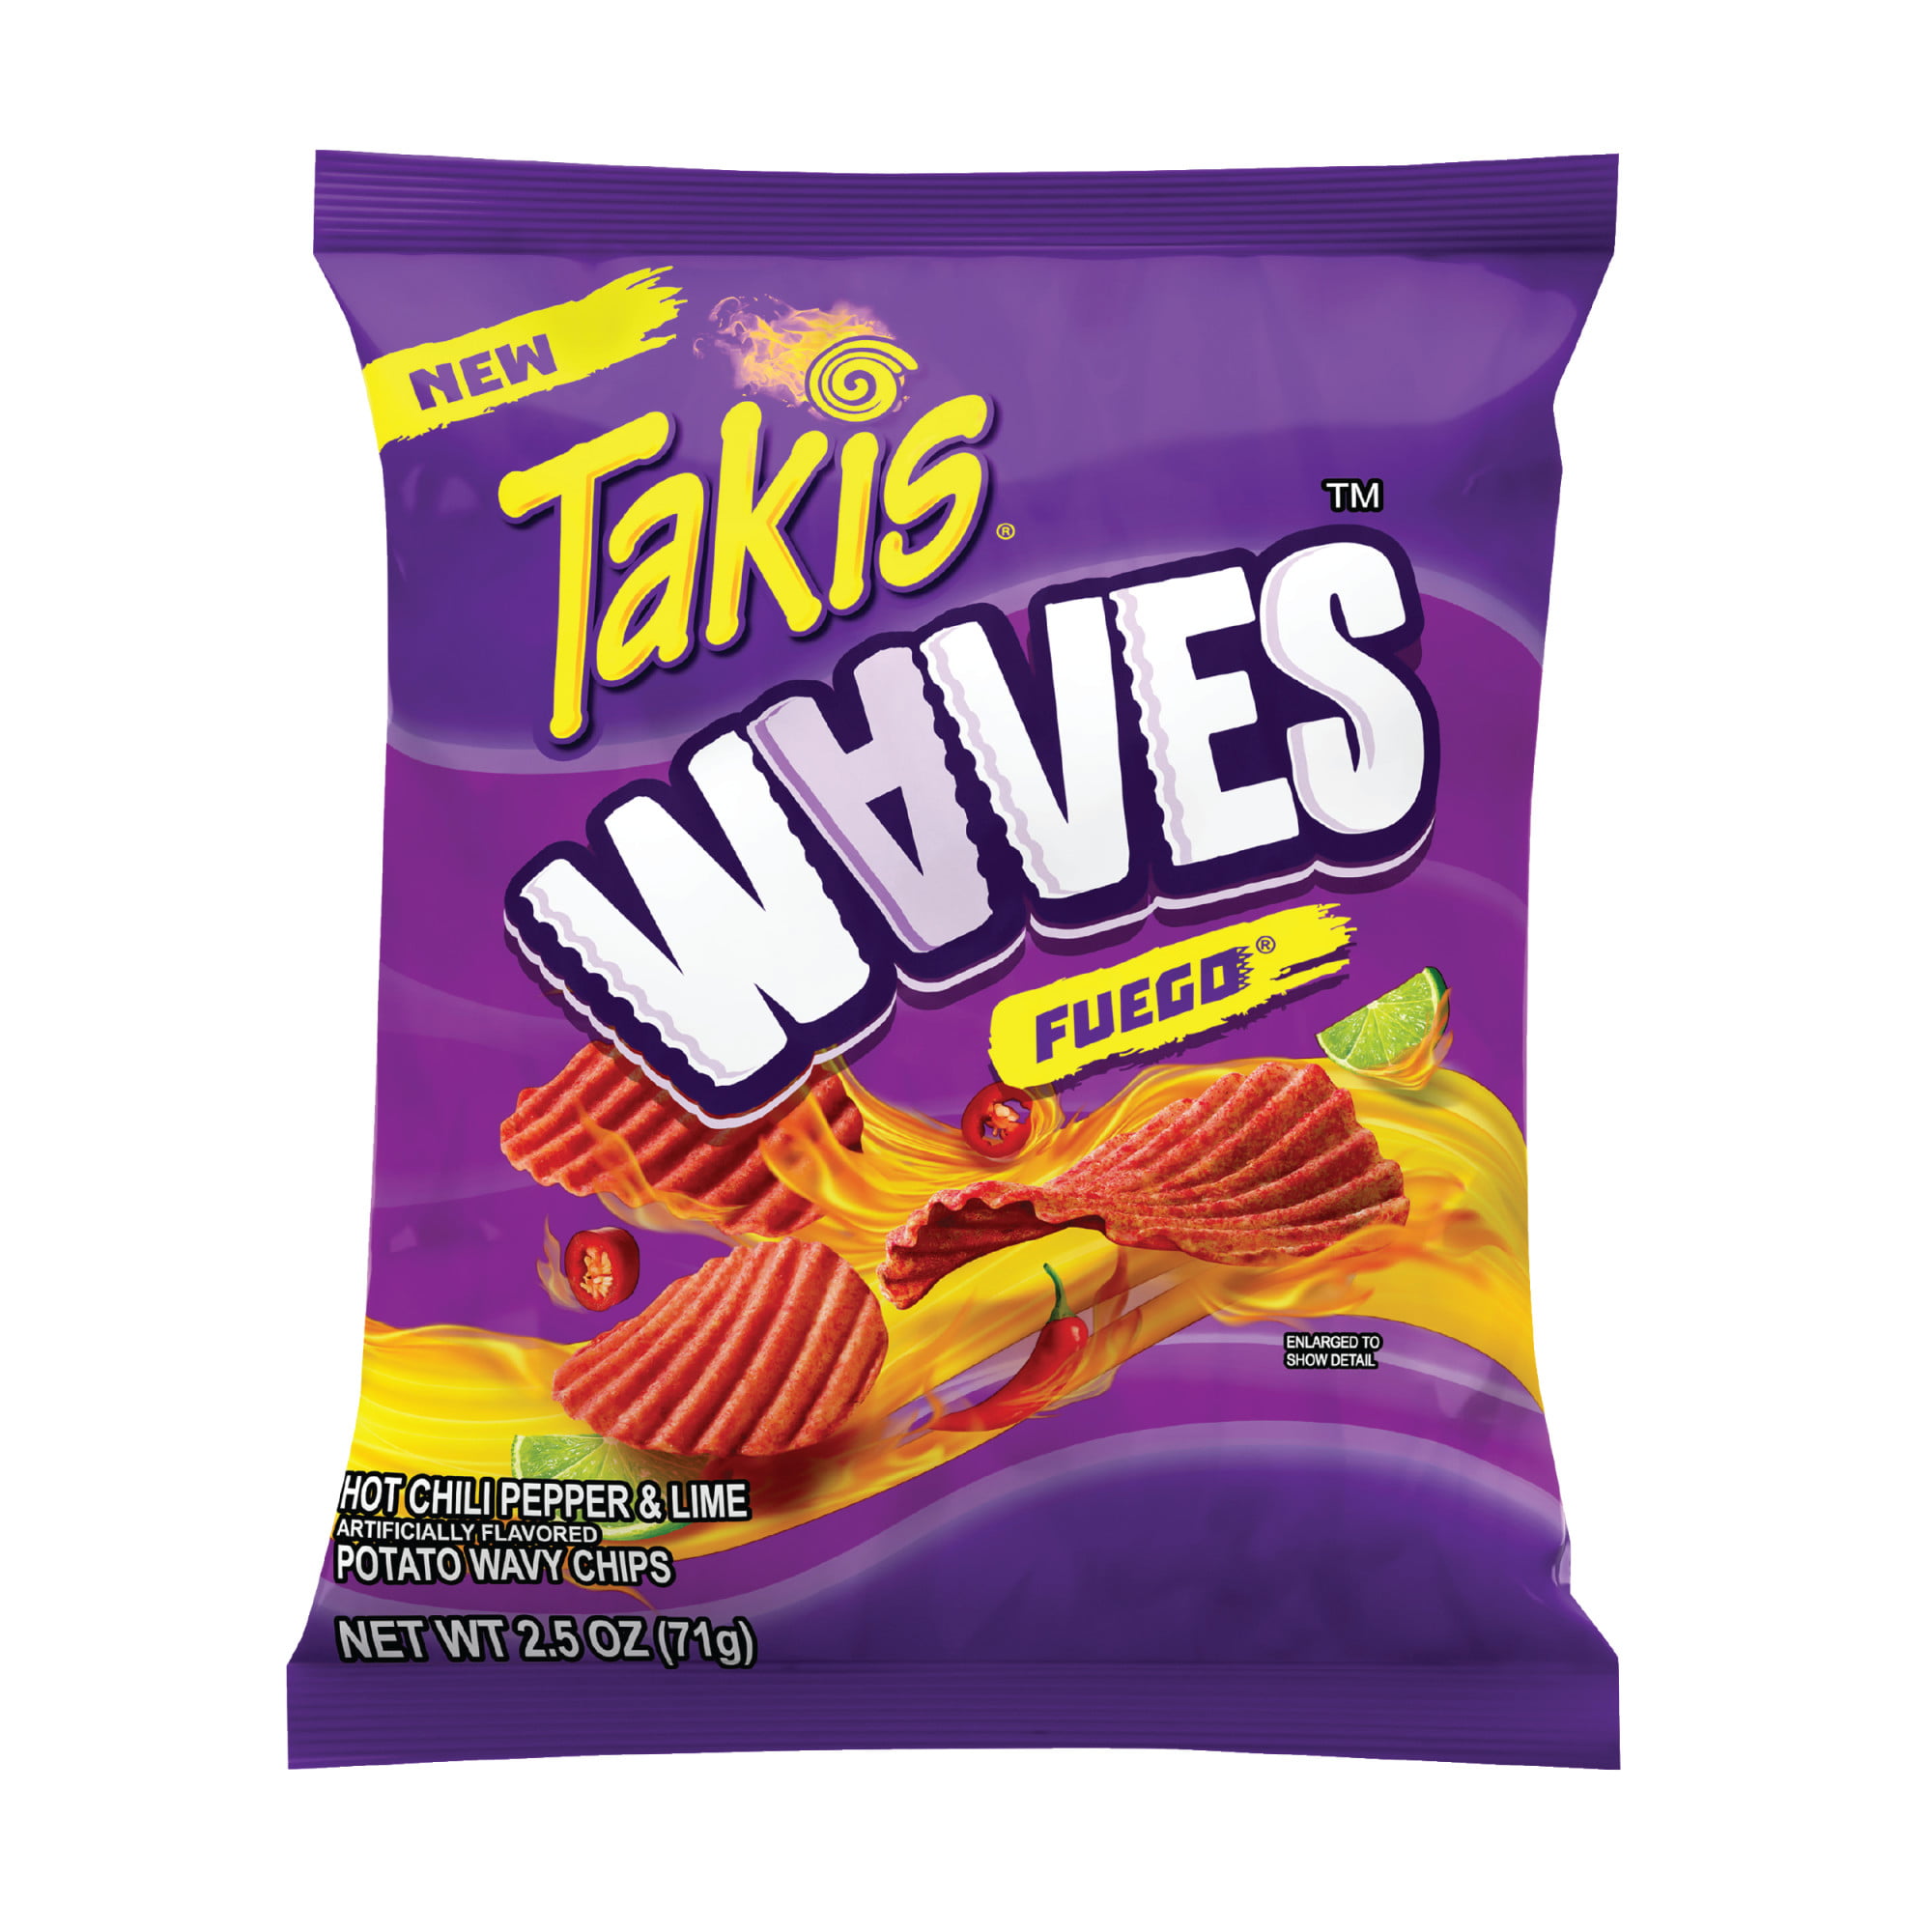 Takis Fuego Waves 2.5 oz Bag,  Hot Chili Pepper & Lime Flavored Spicy Wavy Potato Chips